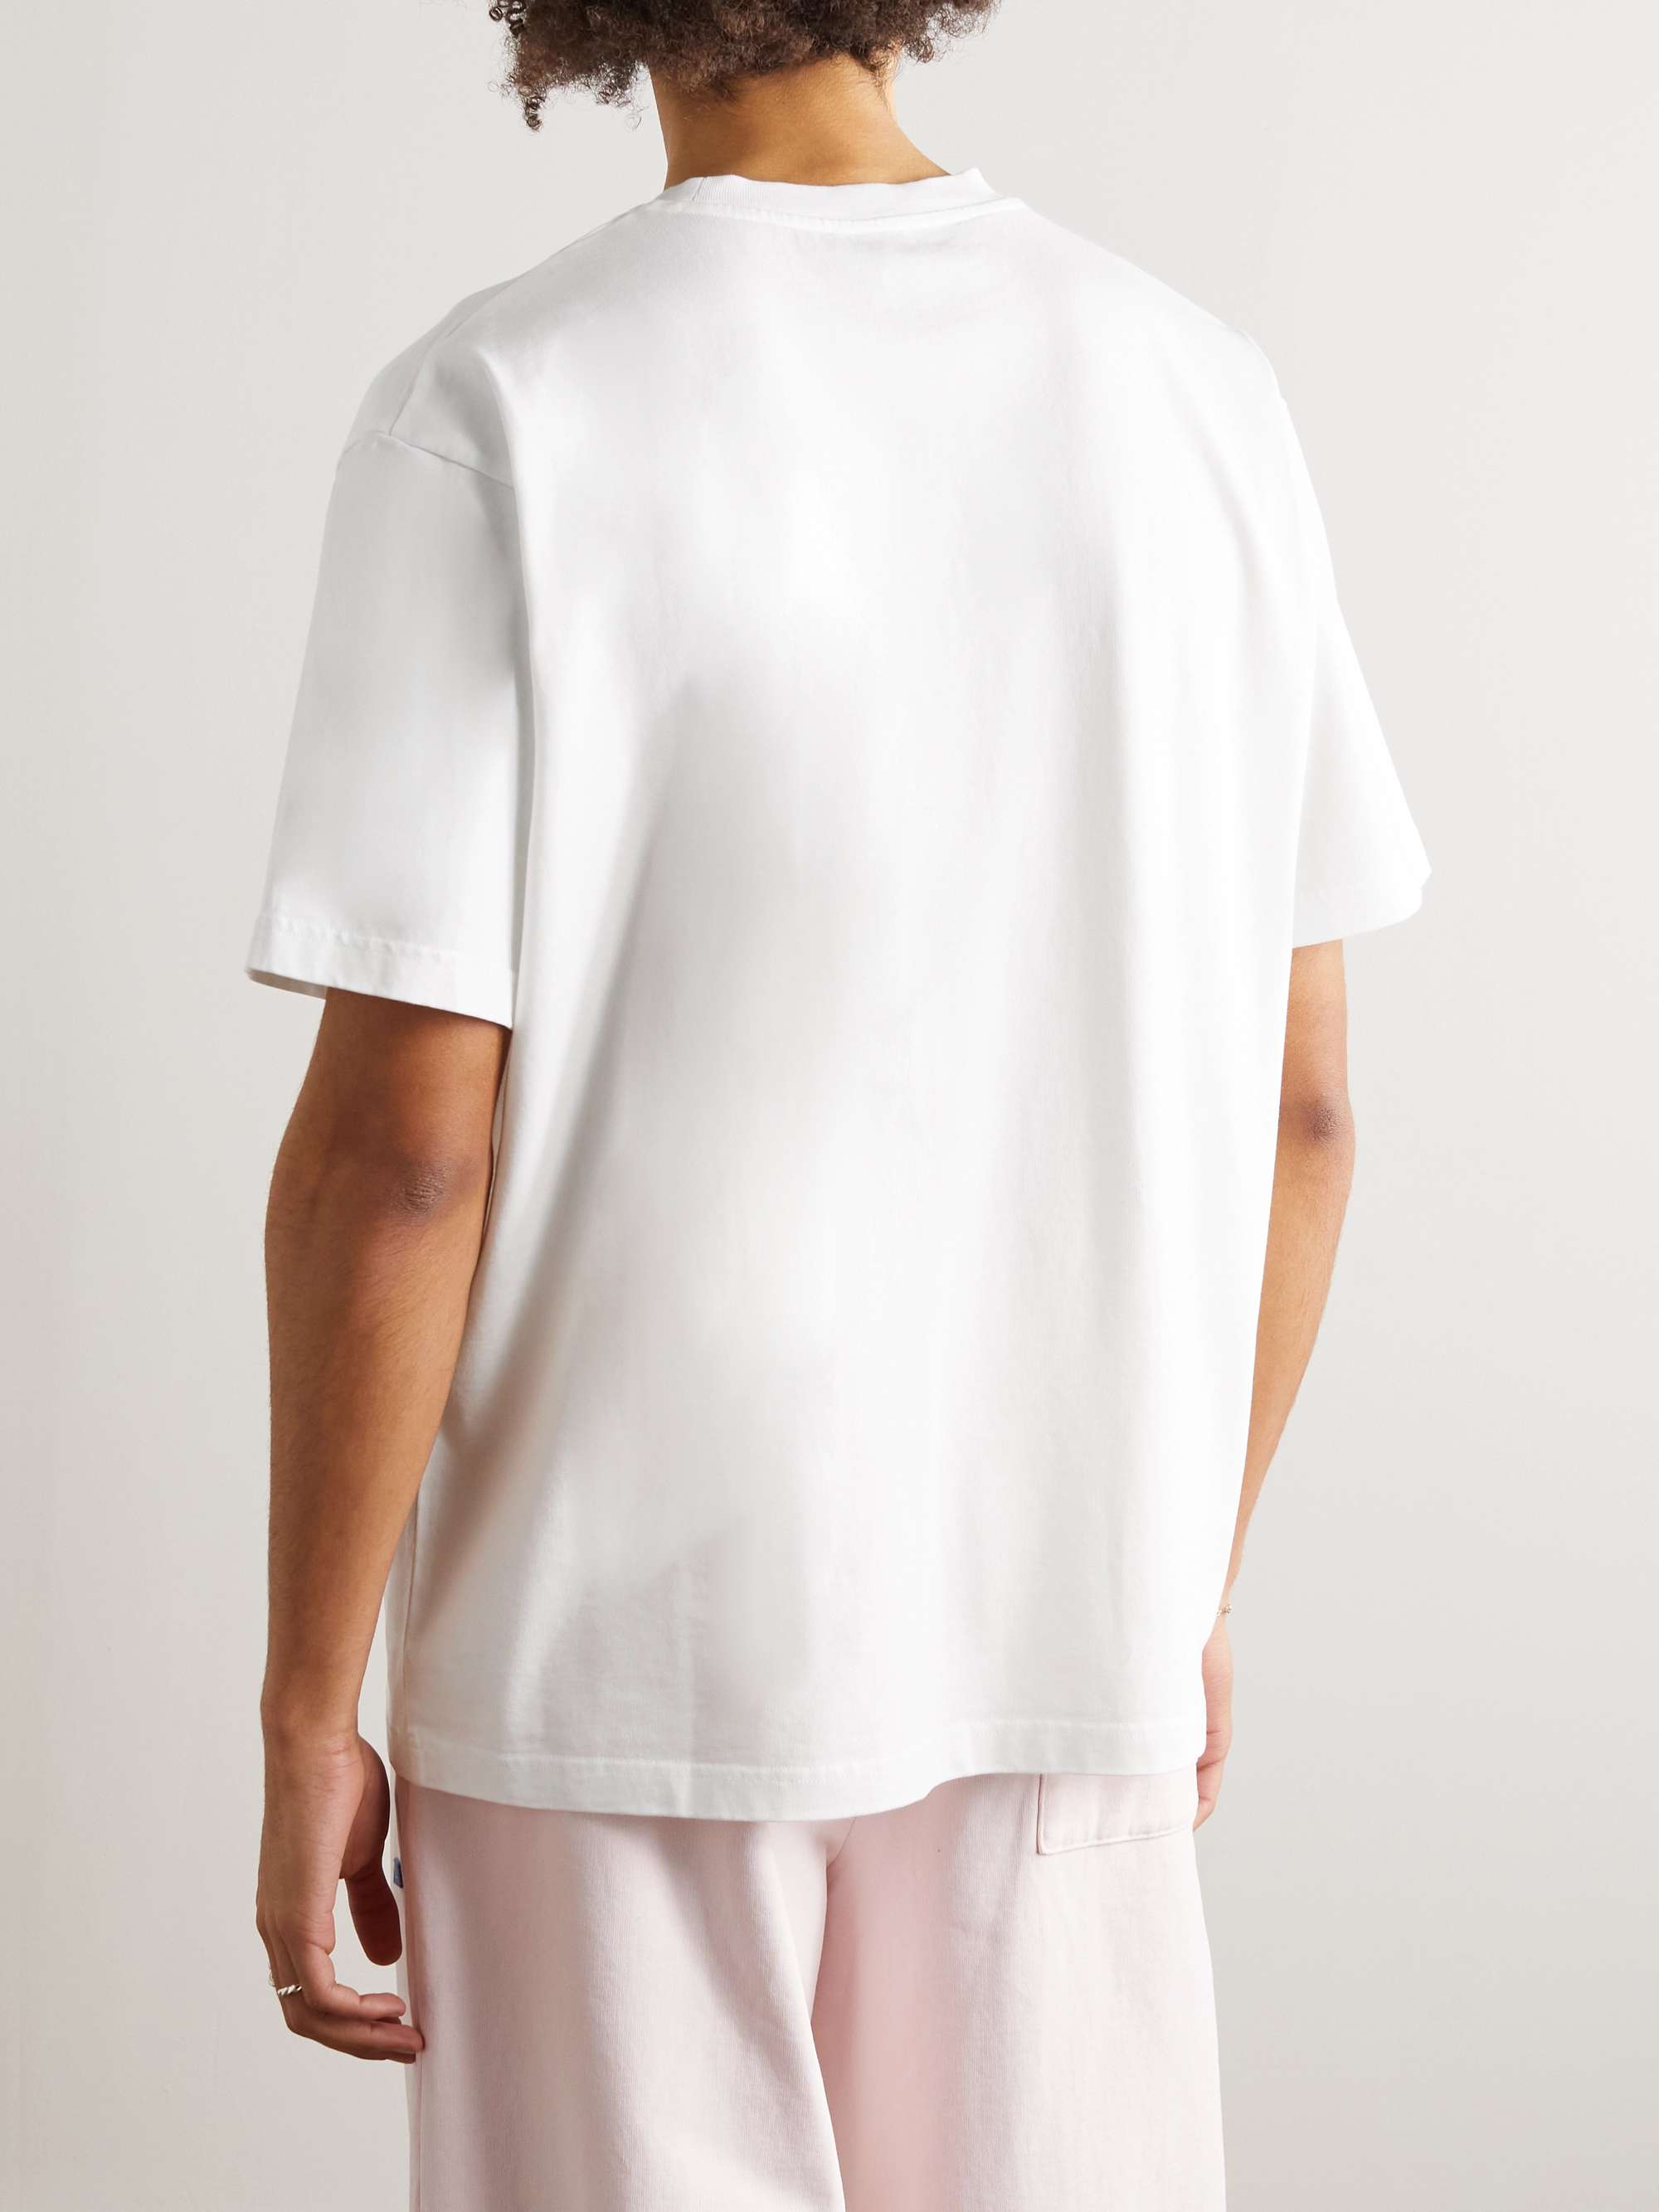 JW ANDERSON Printed Embroidered Cotton-Jersey T-Shirt